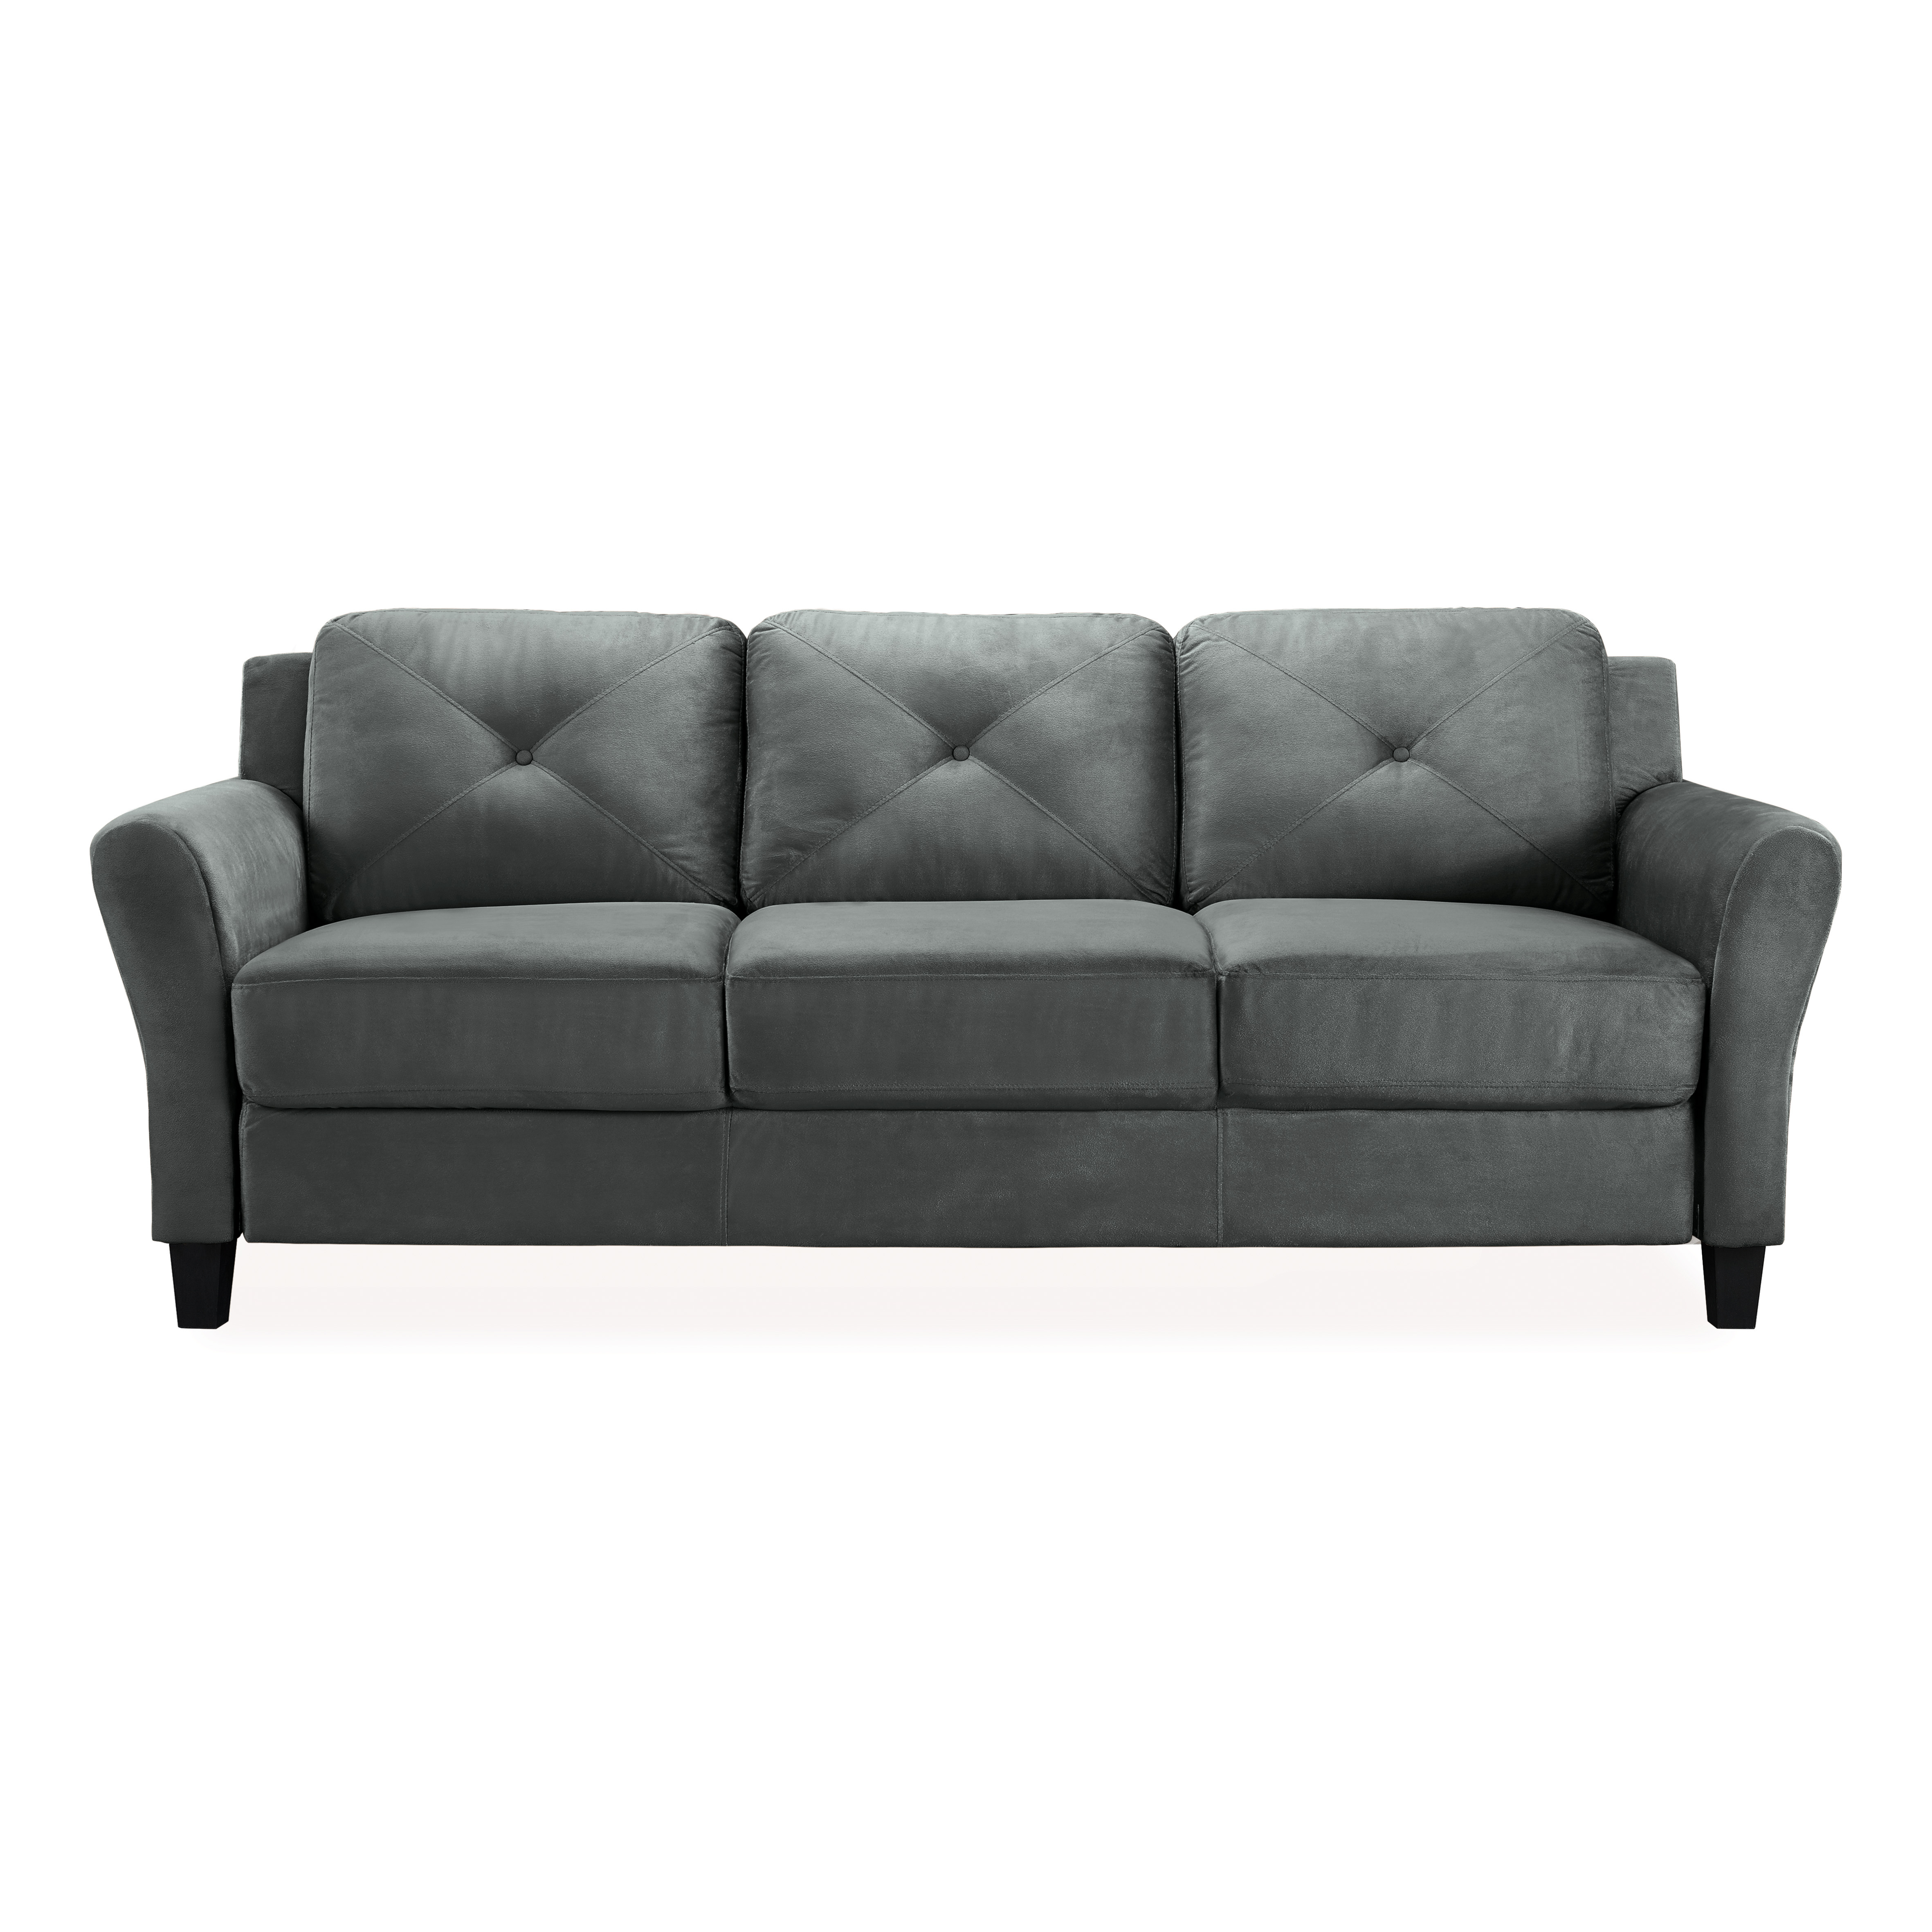 Lifestyle Solutions Taryn Traditional Sofa with Rolled Arms, Dark Gray Fabric - image 1 of 8